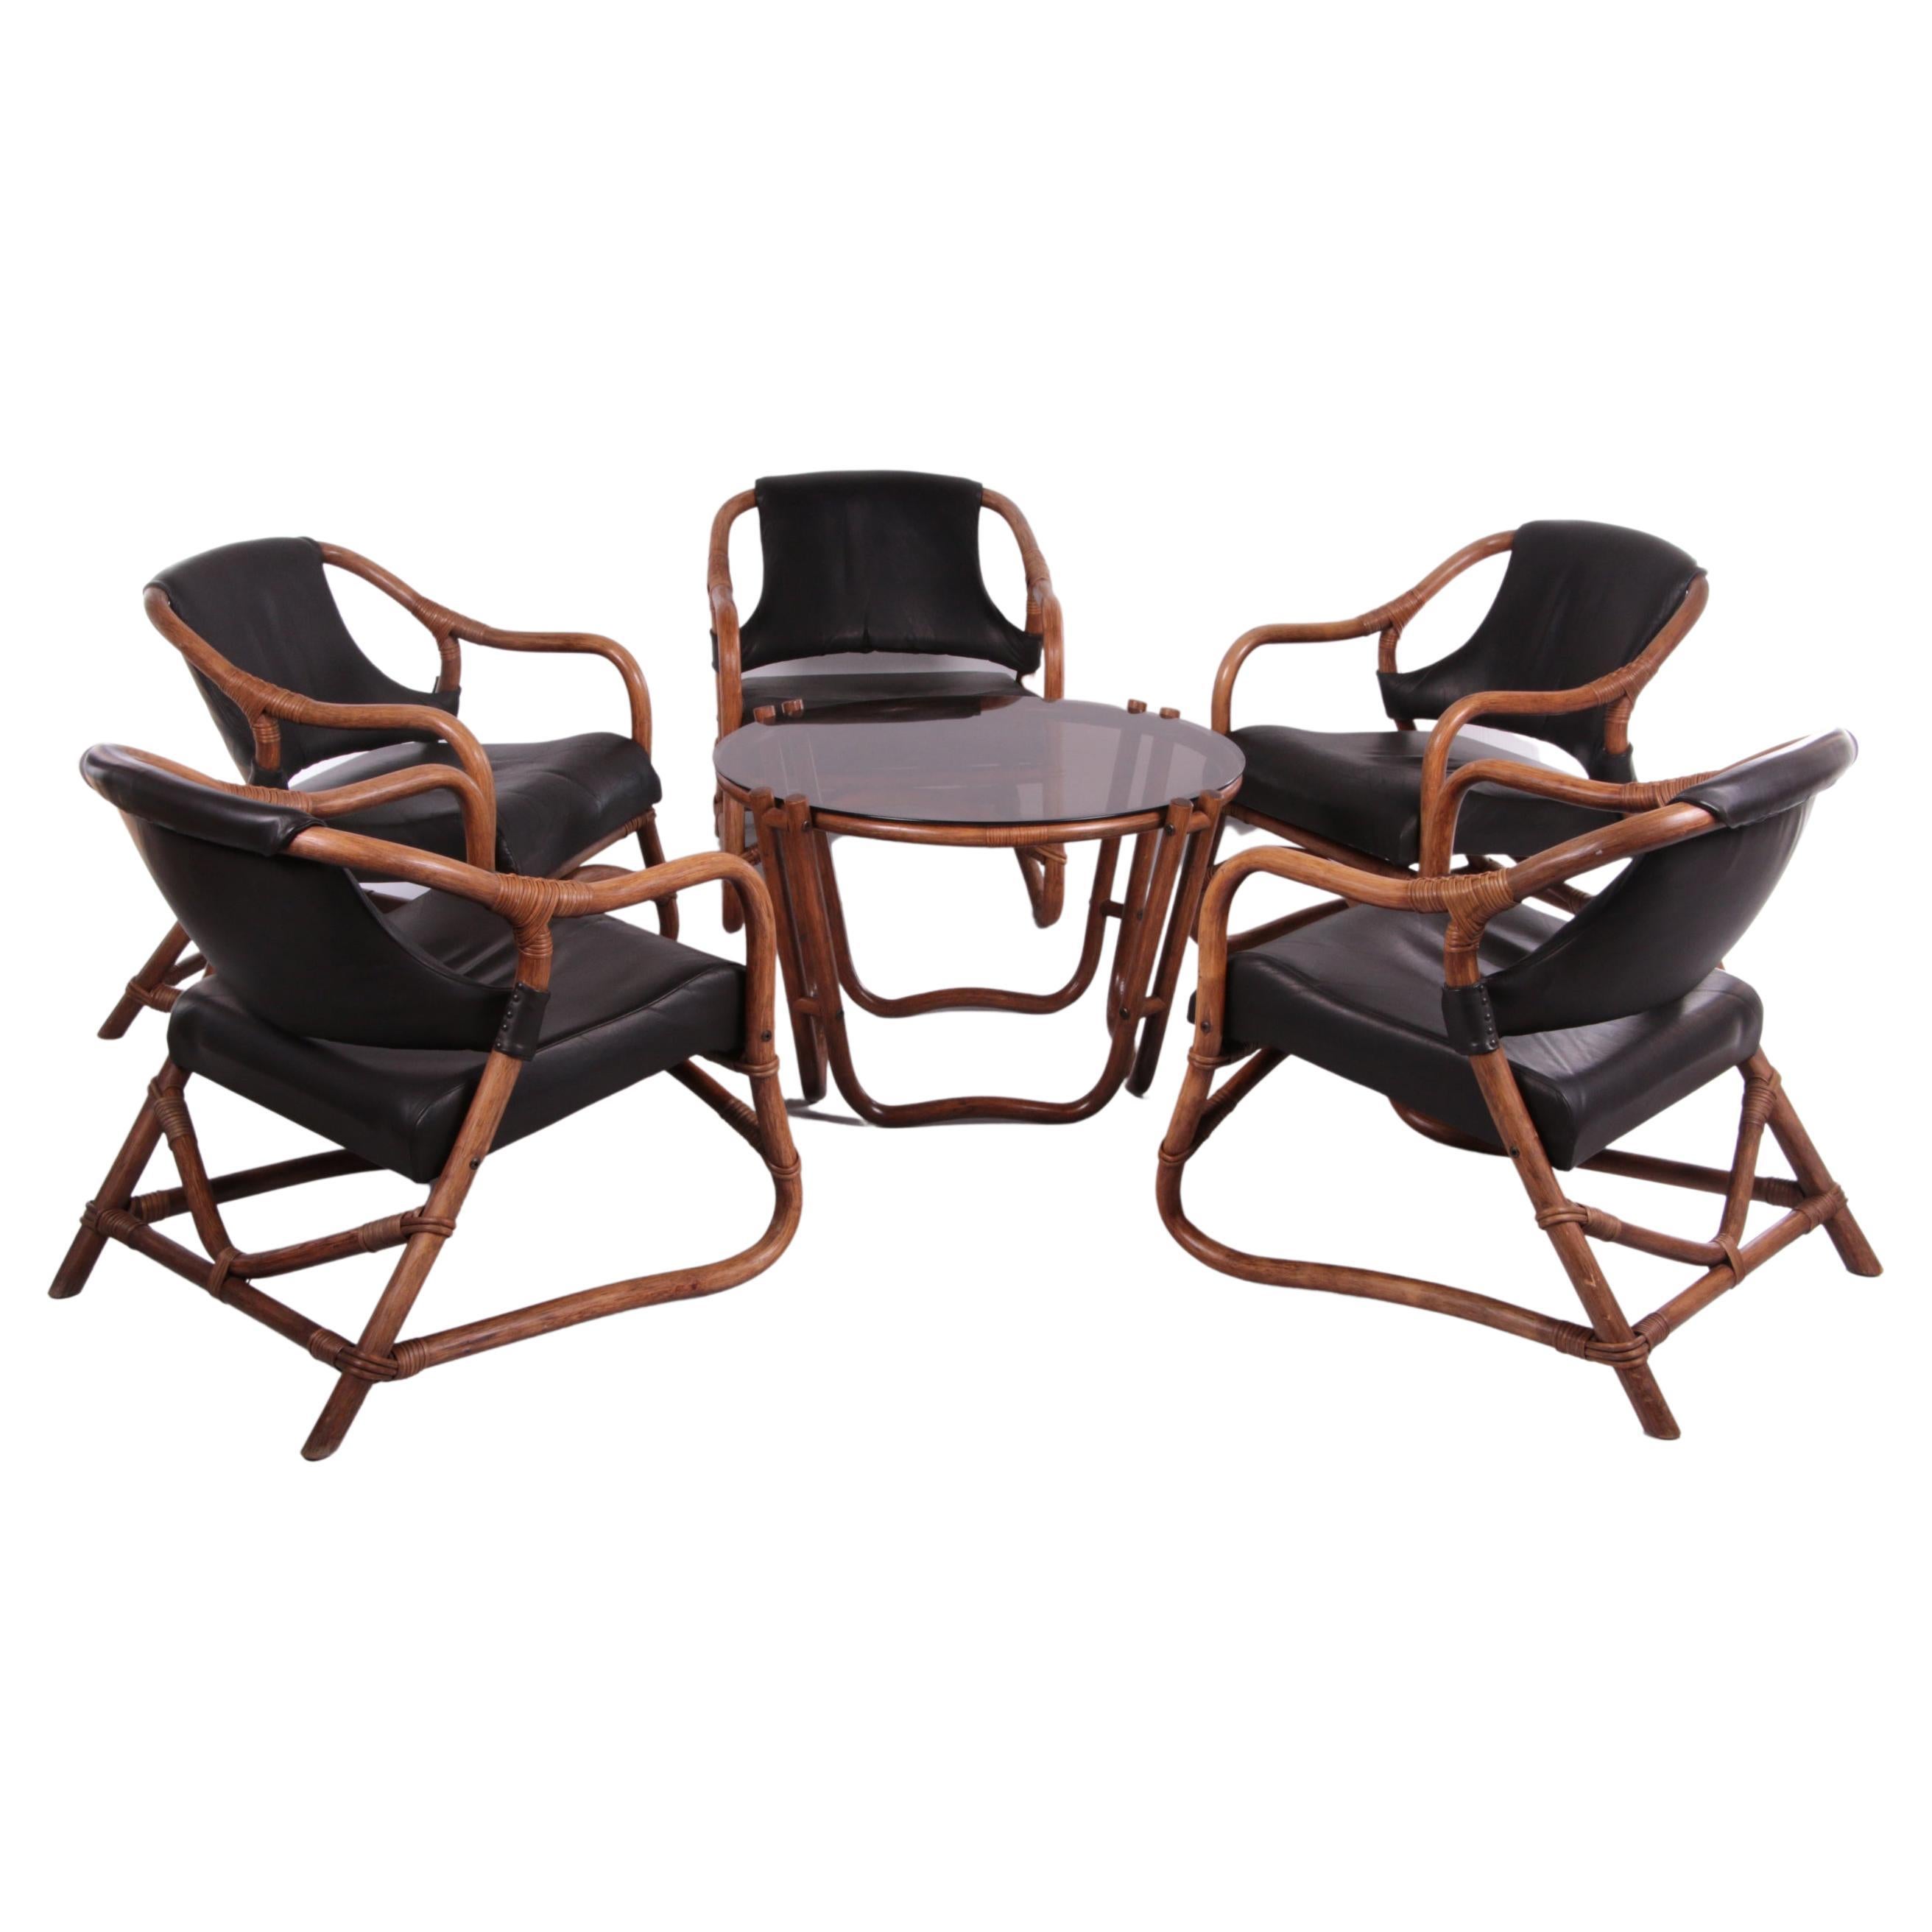 French Vintage Bamboo Lounge Set with Black Leather Seat, 1960s